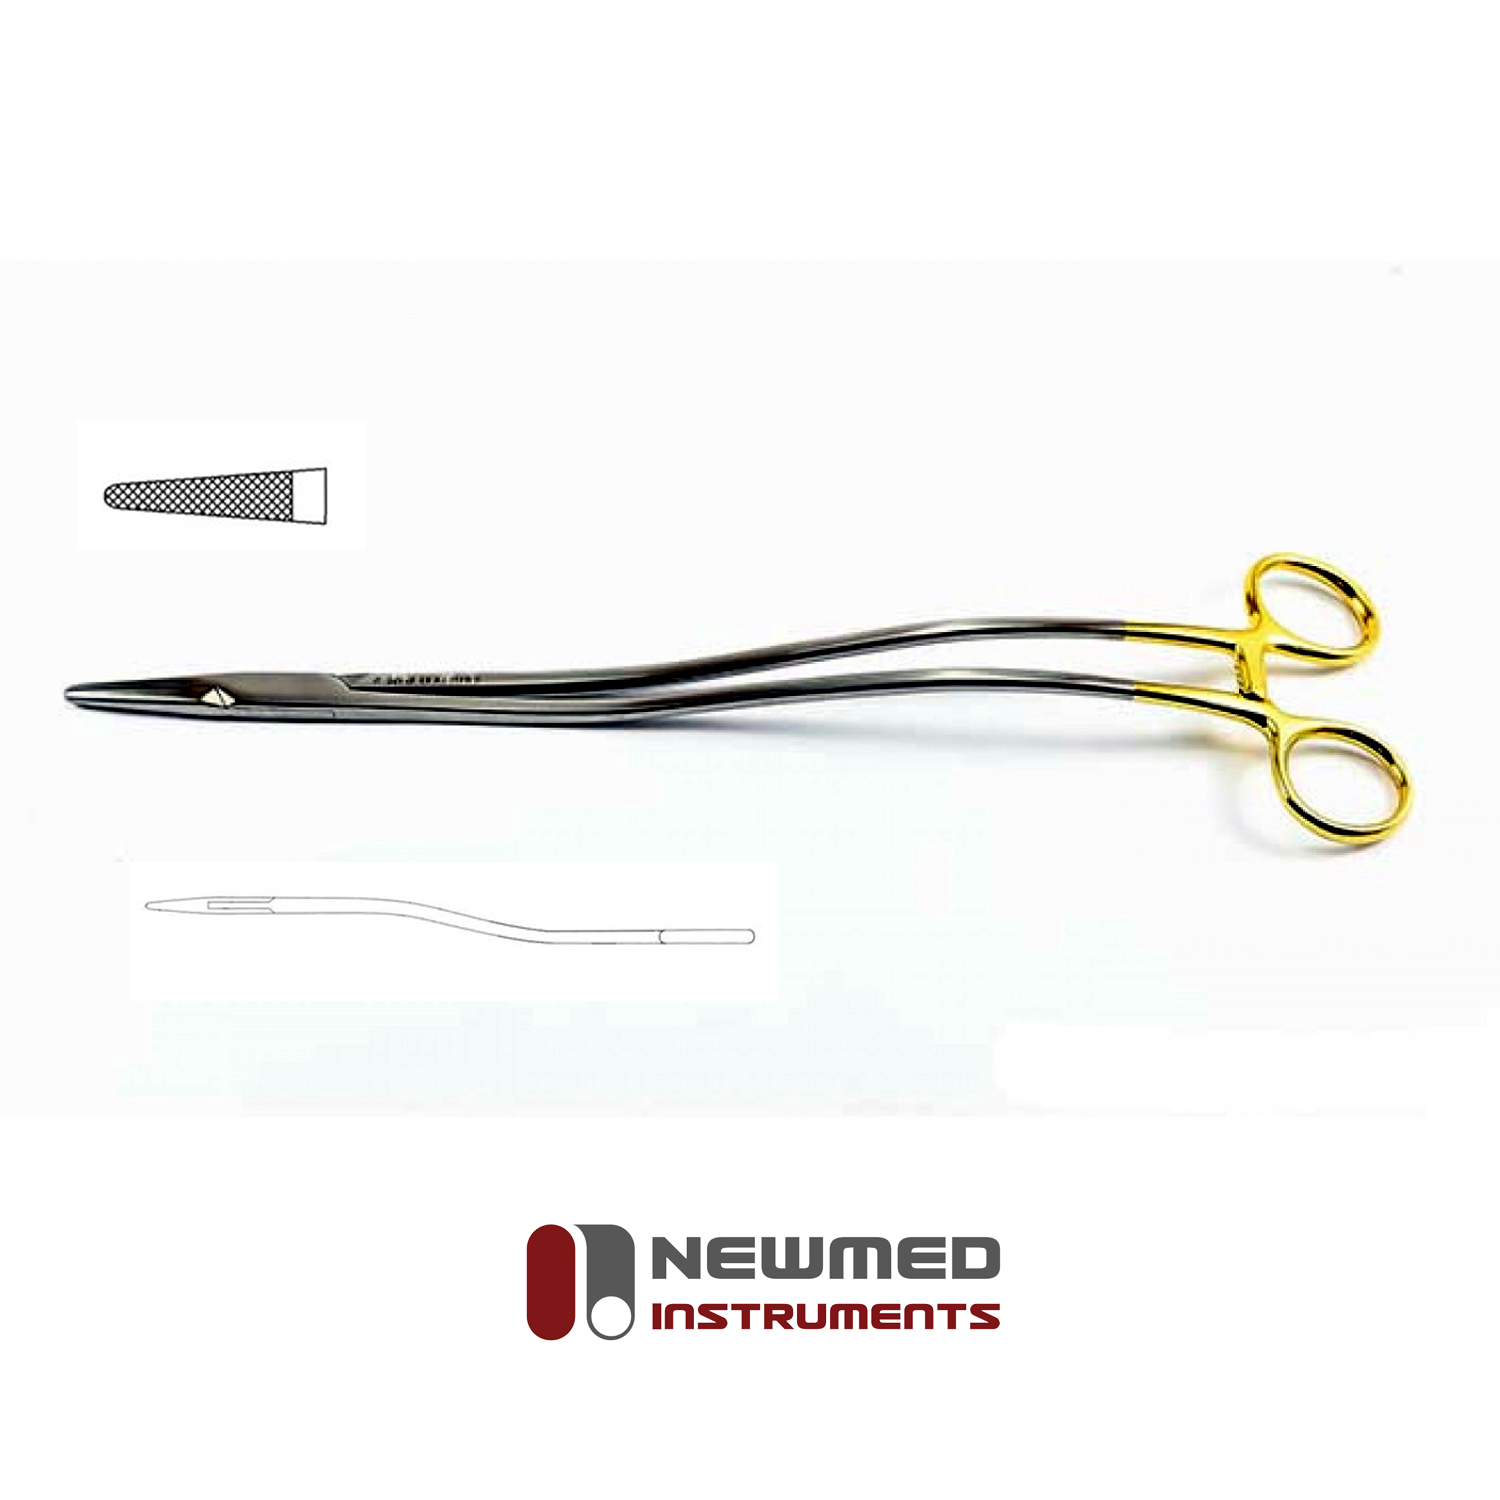 Bozeman Needle Holder Surgical Needle Driver 6 Suture Tying Forceps ANGLED  With Tungsten Carbide Insert ARTMAN - Artman Instruments